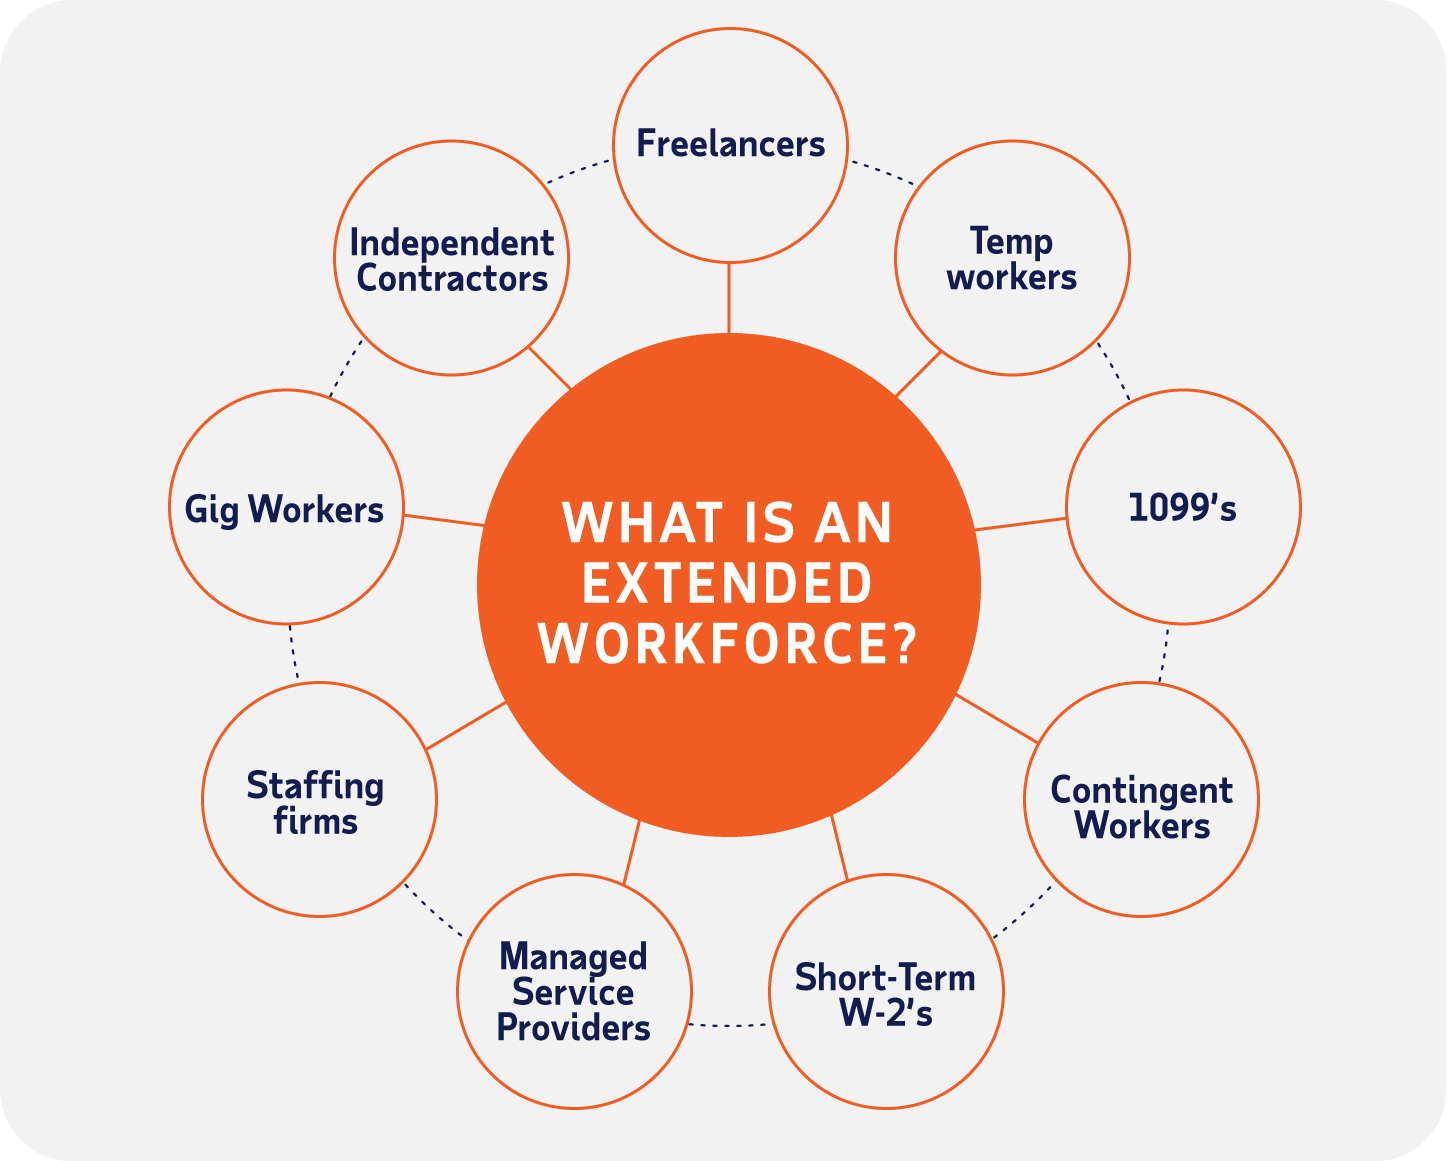 What is an extended workforce